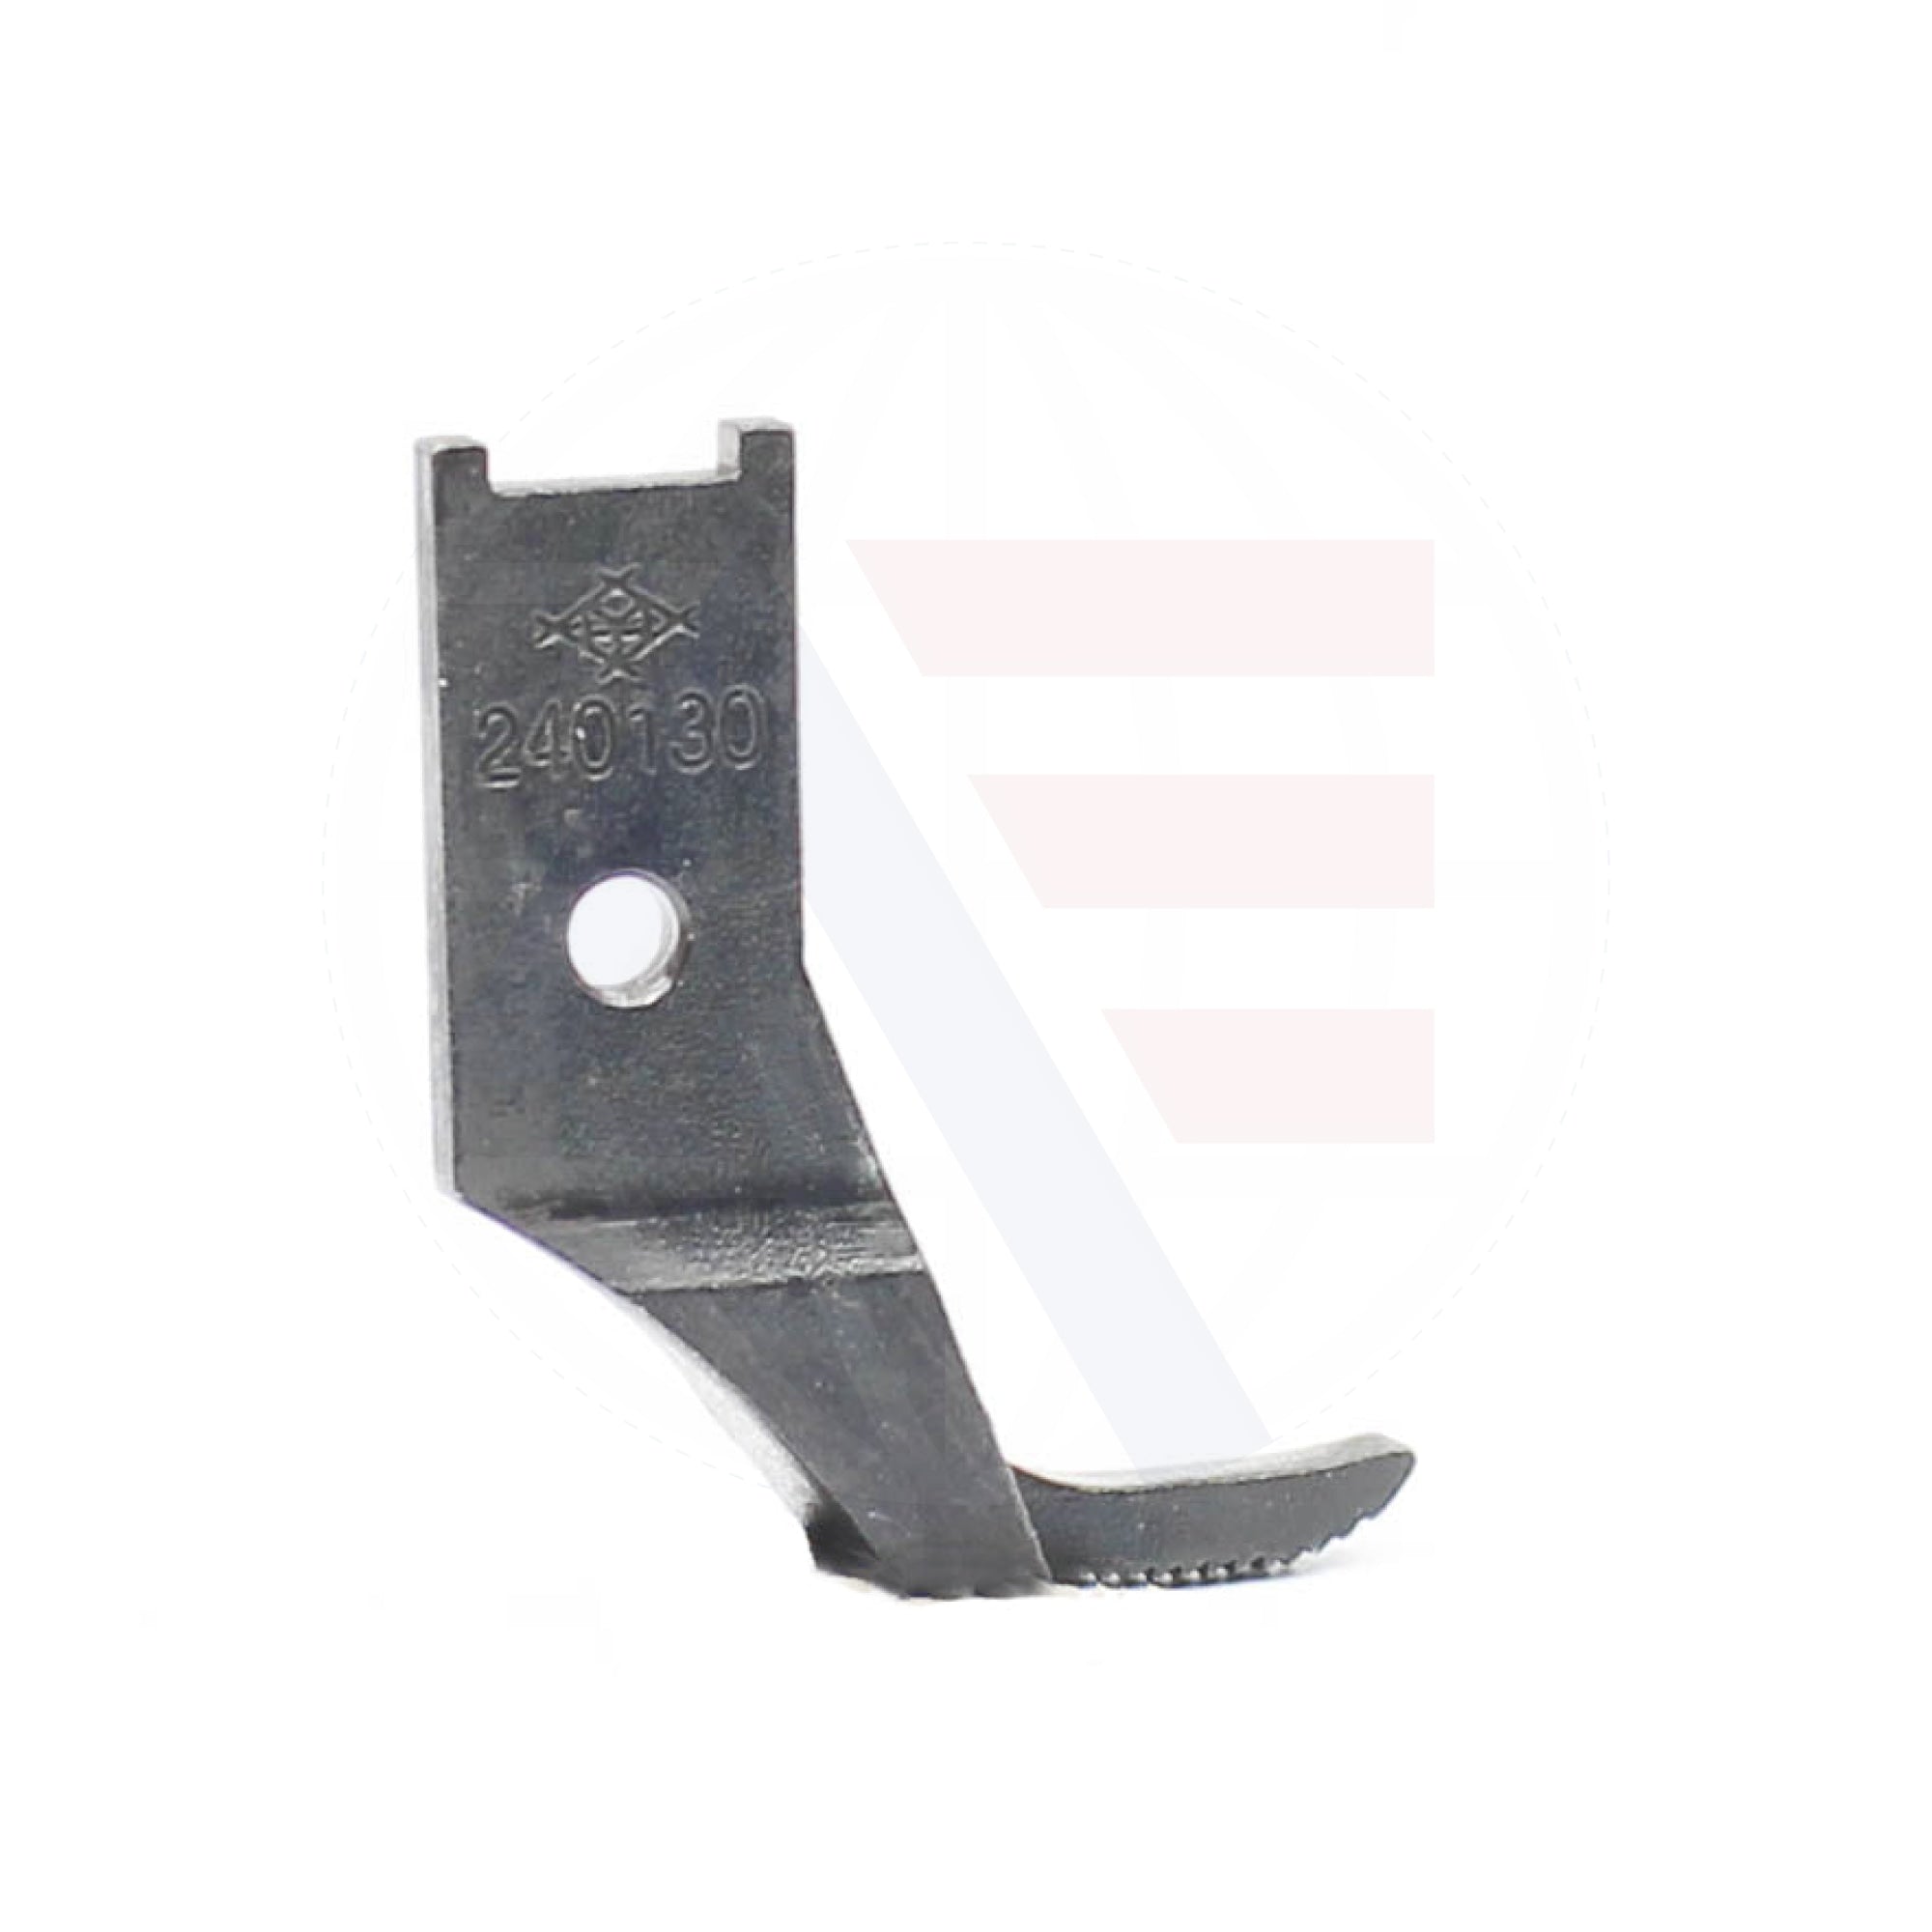 240130 Outside Foot Sewing Machine Spare Parts